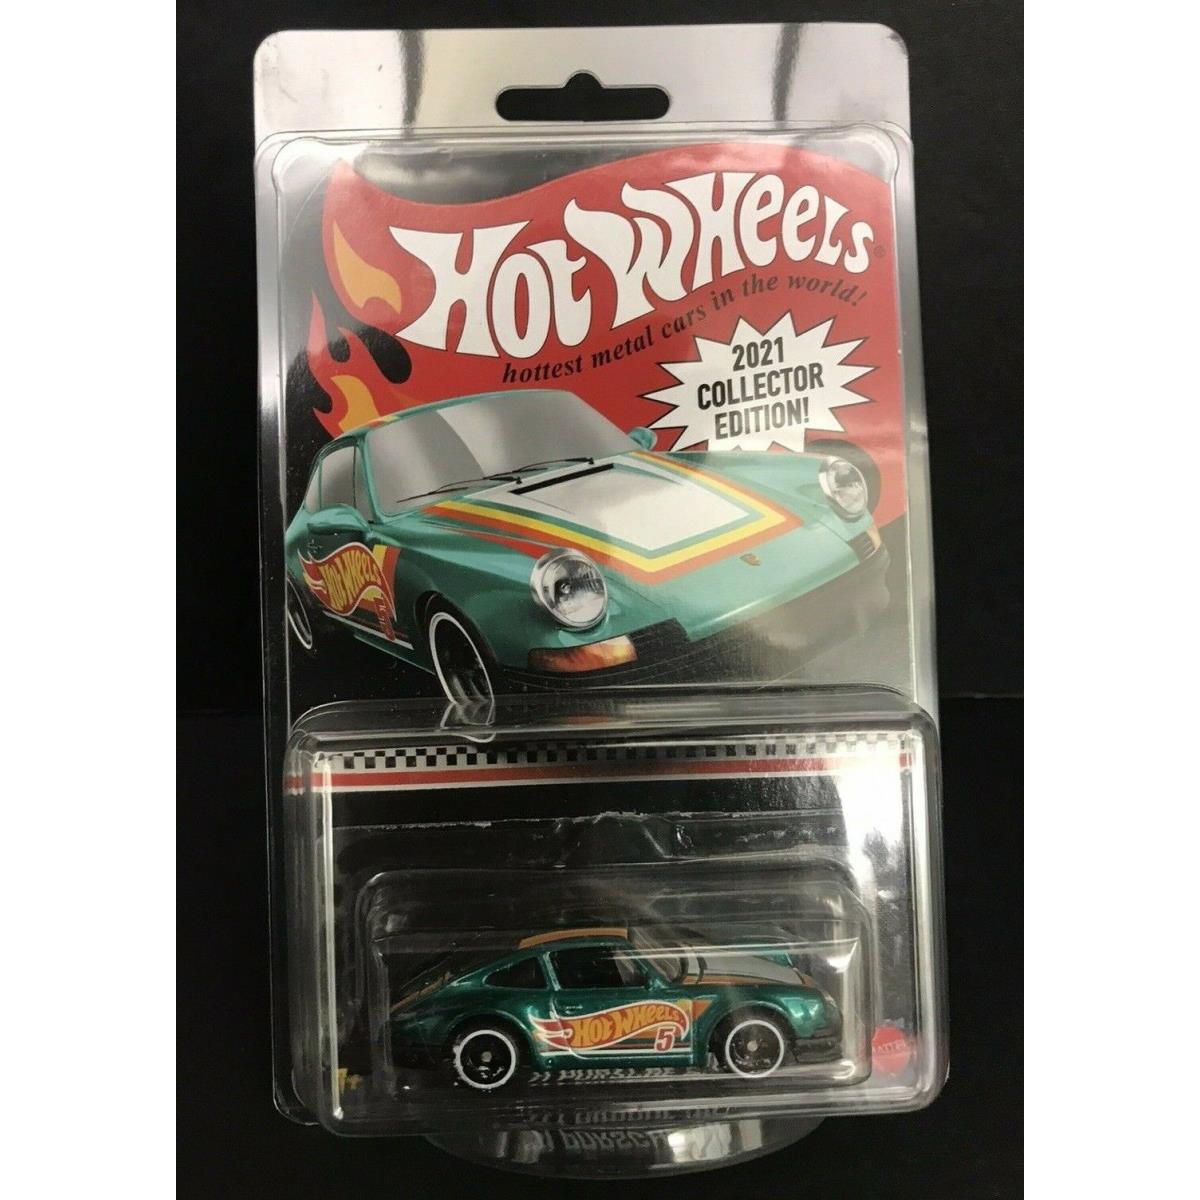 2021 Hot Wheels Collector Edition Target Mail-in 5 `71 Porsche 911 W/protector